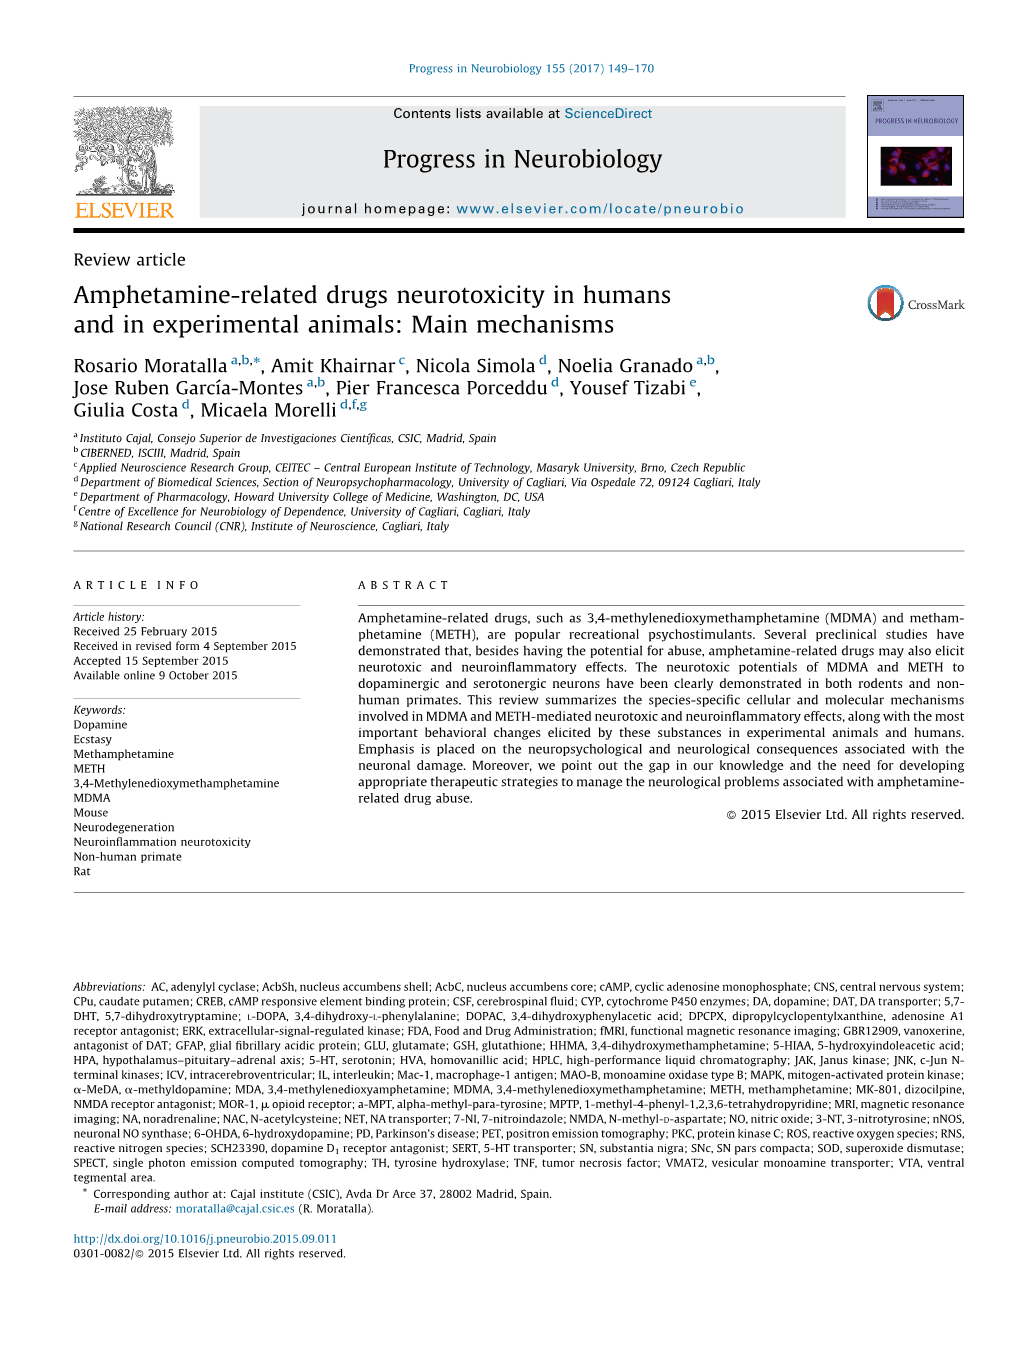 Amphetamine-Related Drugs Neurotoxicity in Humans and in Experimental Animals: Main Mechanisms